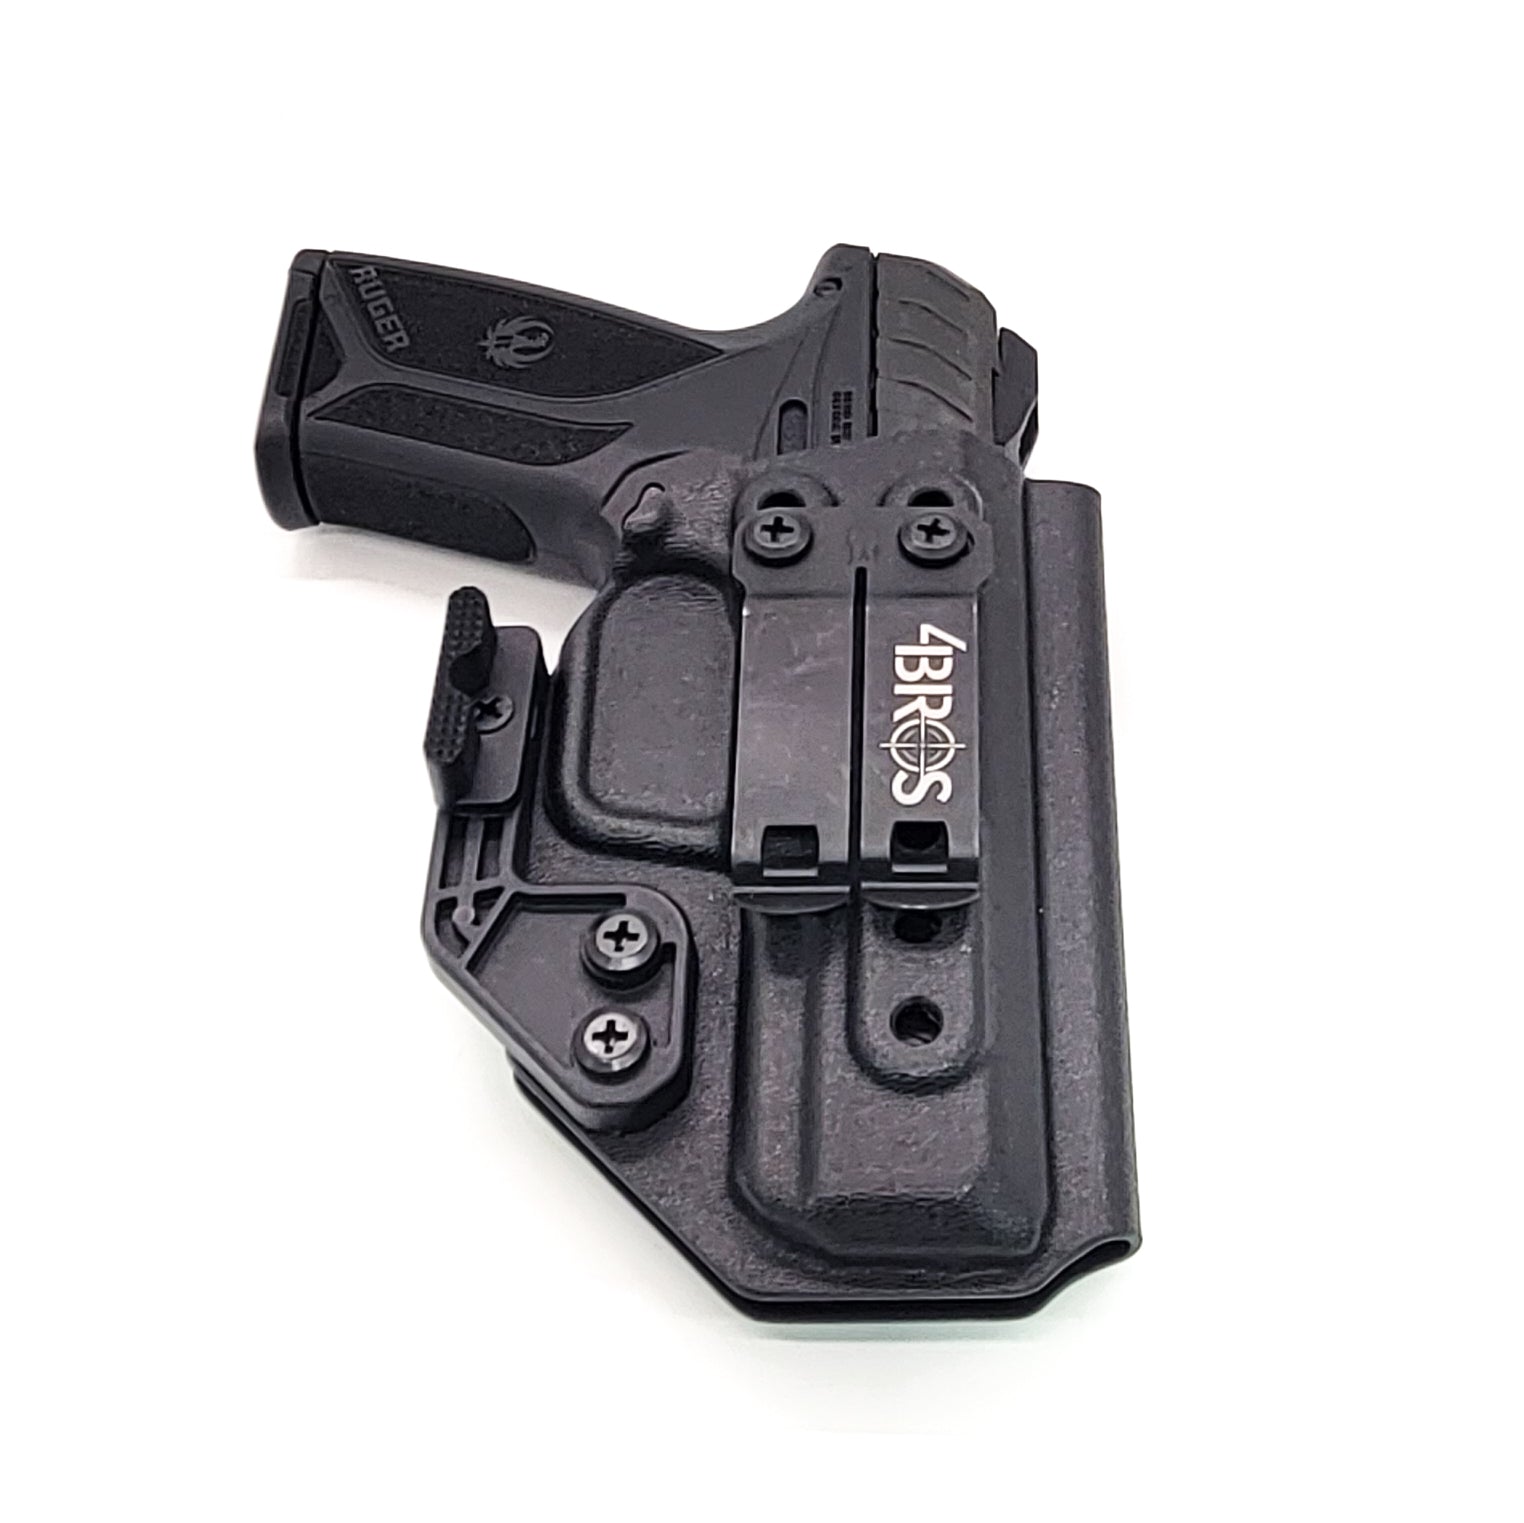 For the best, most comfortable, AIWB, IWB, Kydex Inside Waistband Holster Designed to fit the Ruger Security 9 pistol, shop Four Brothers 4BROS holsters. Adjustable retention, high sweat guard, smooth edges, and minimal material for improved comfort and concealment. Made in the USA 